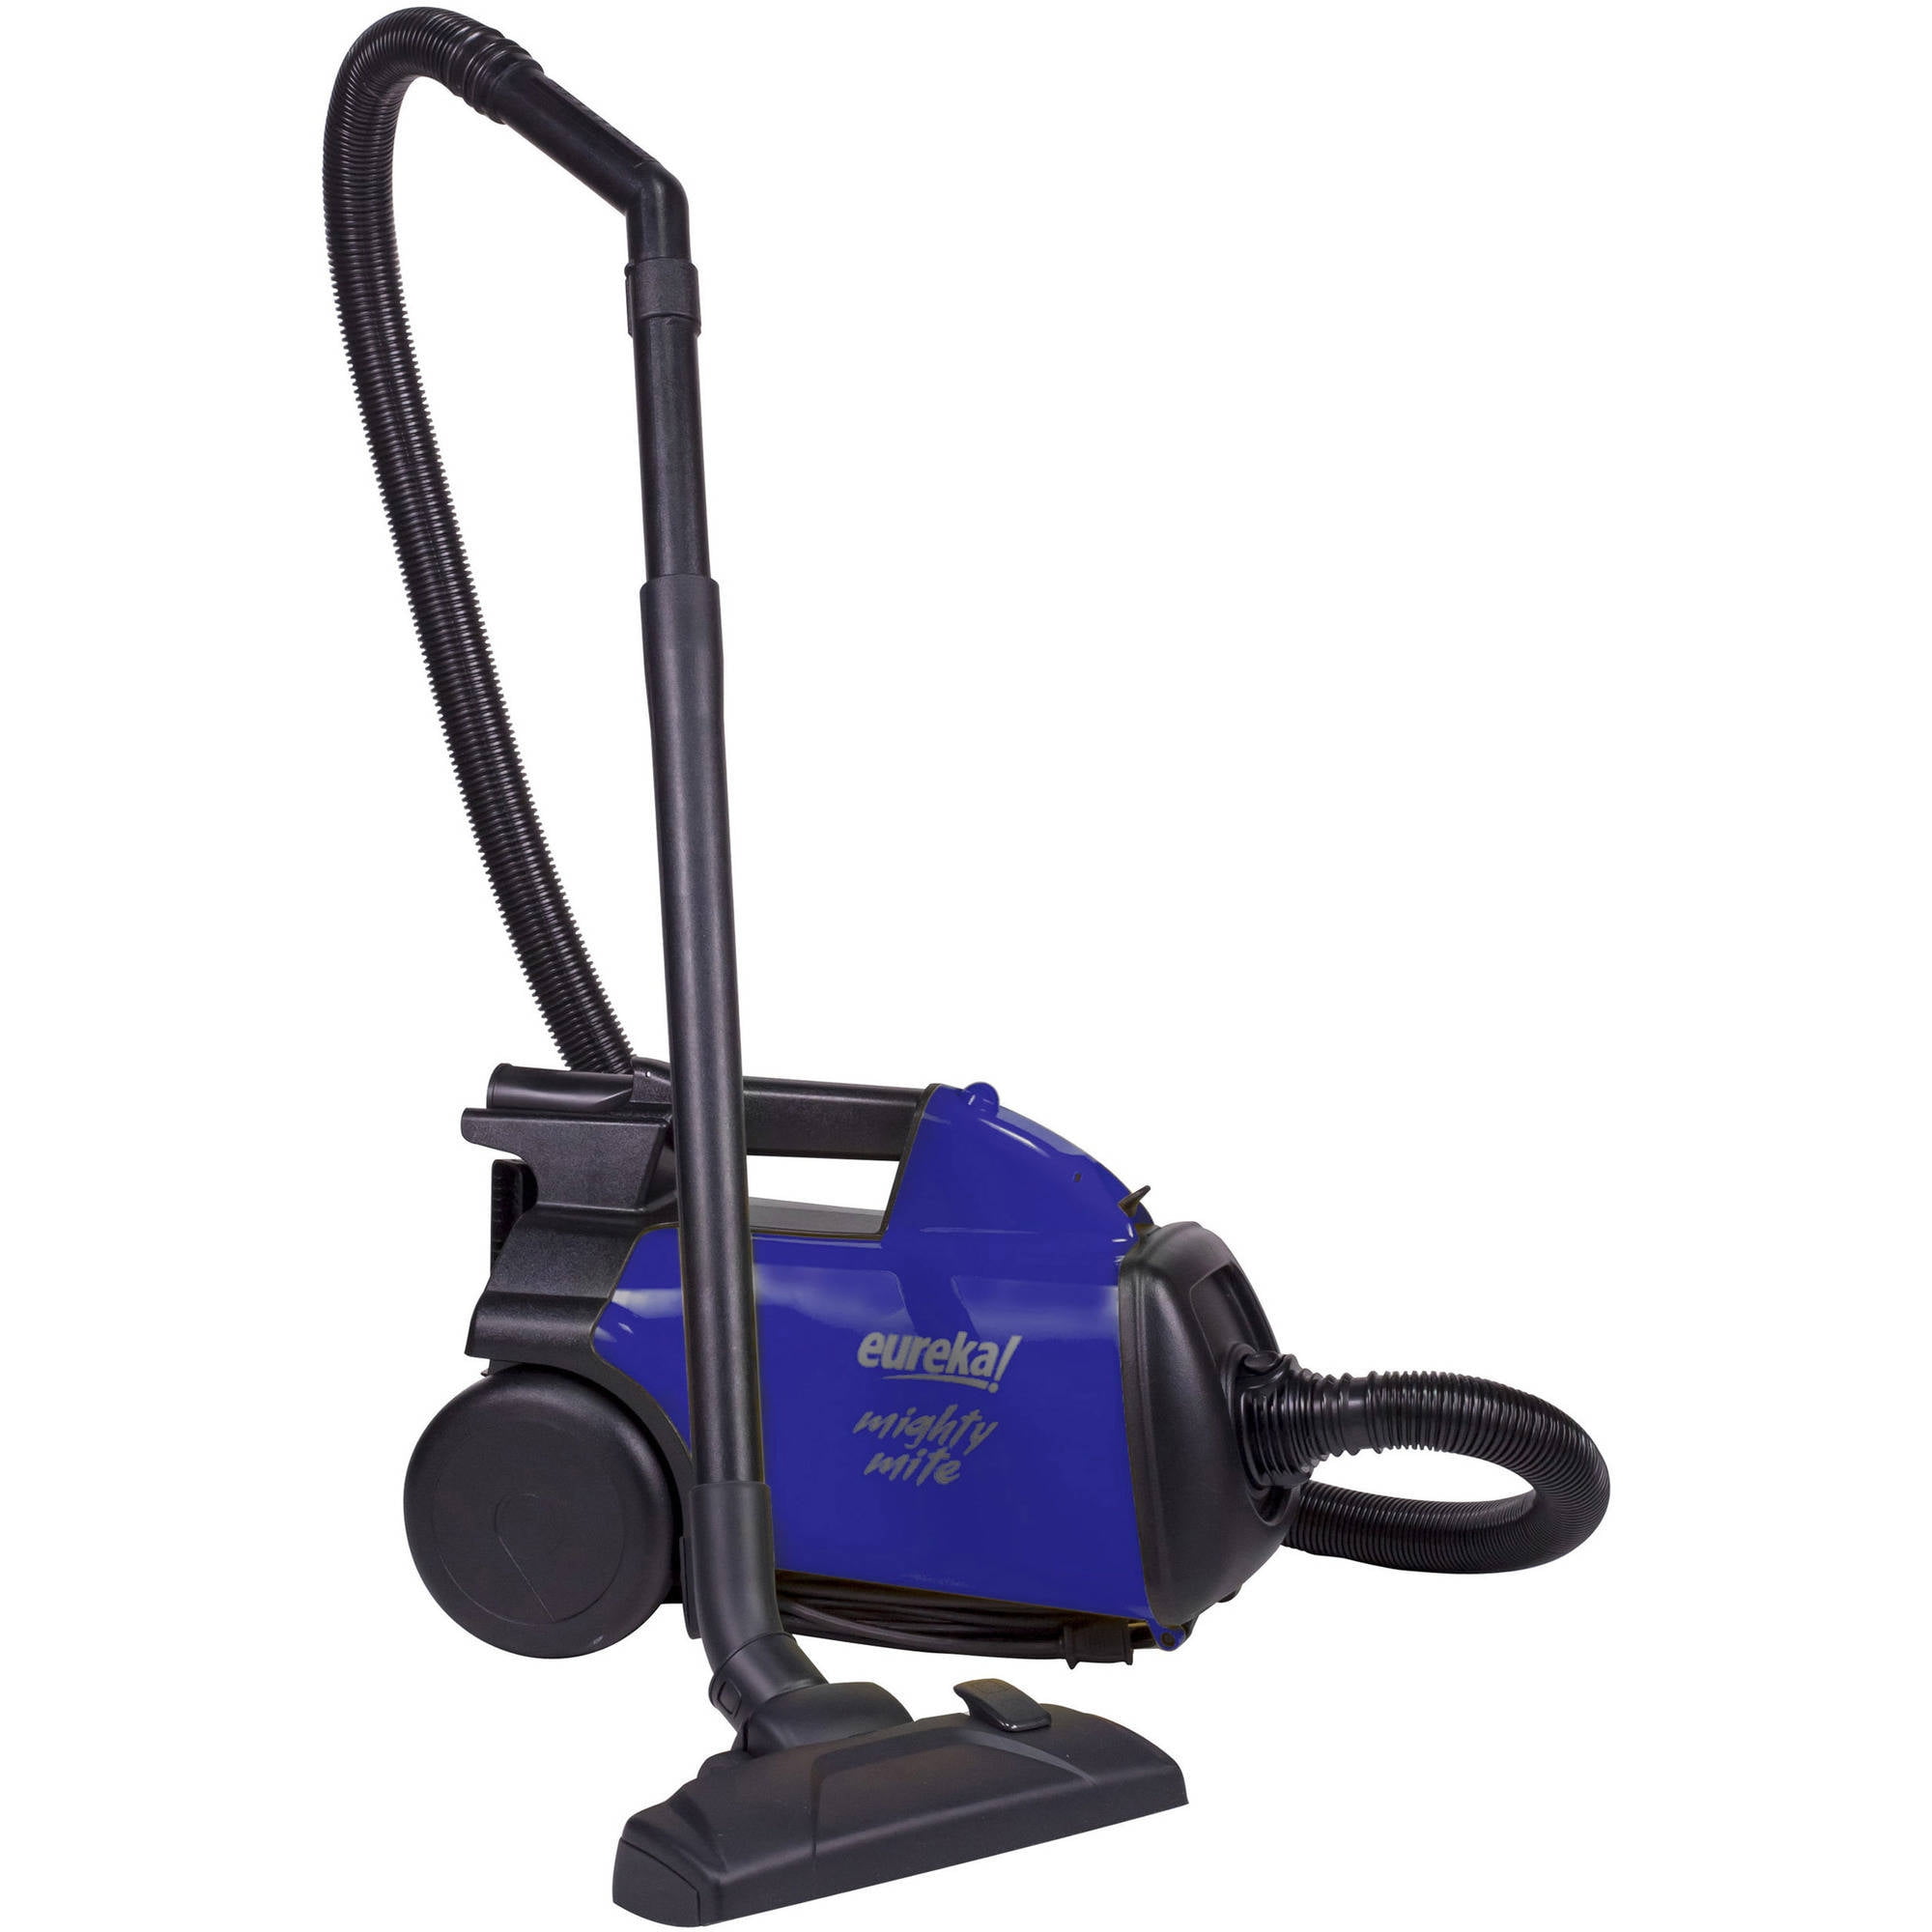 Eureka Mighty Mite 3670M Corded Canister Vacuum Cleaner New 